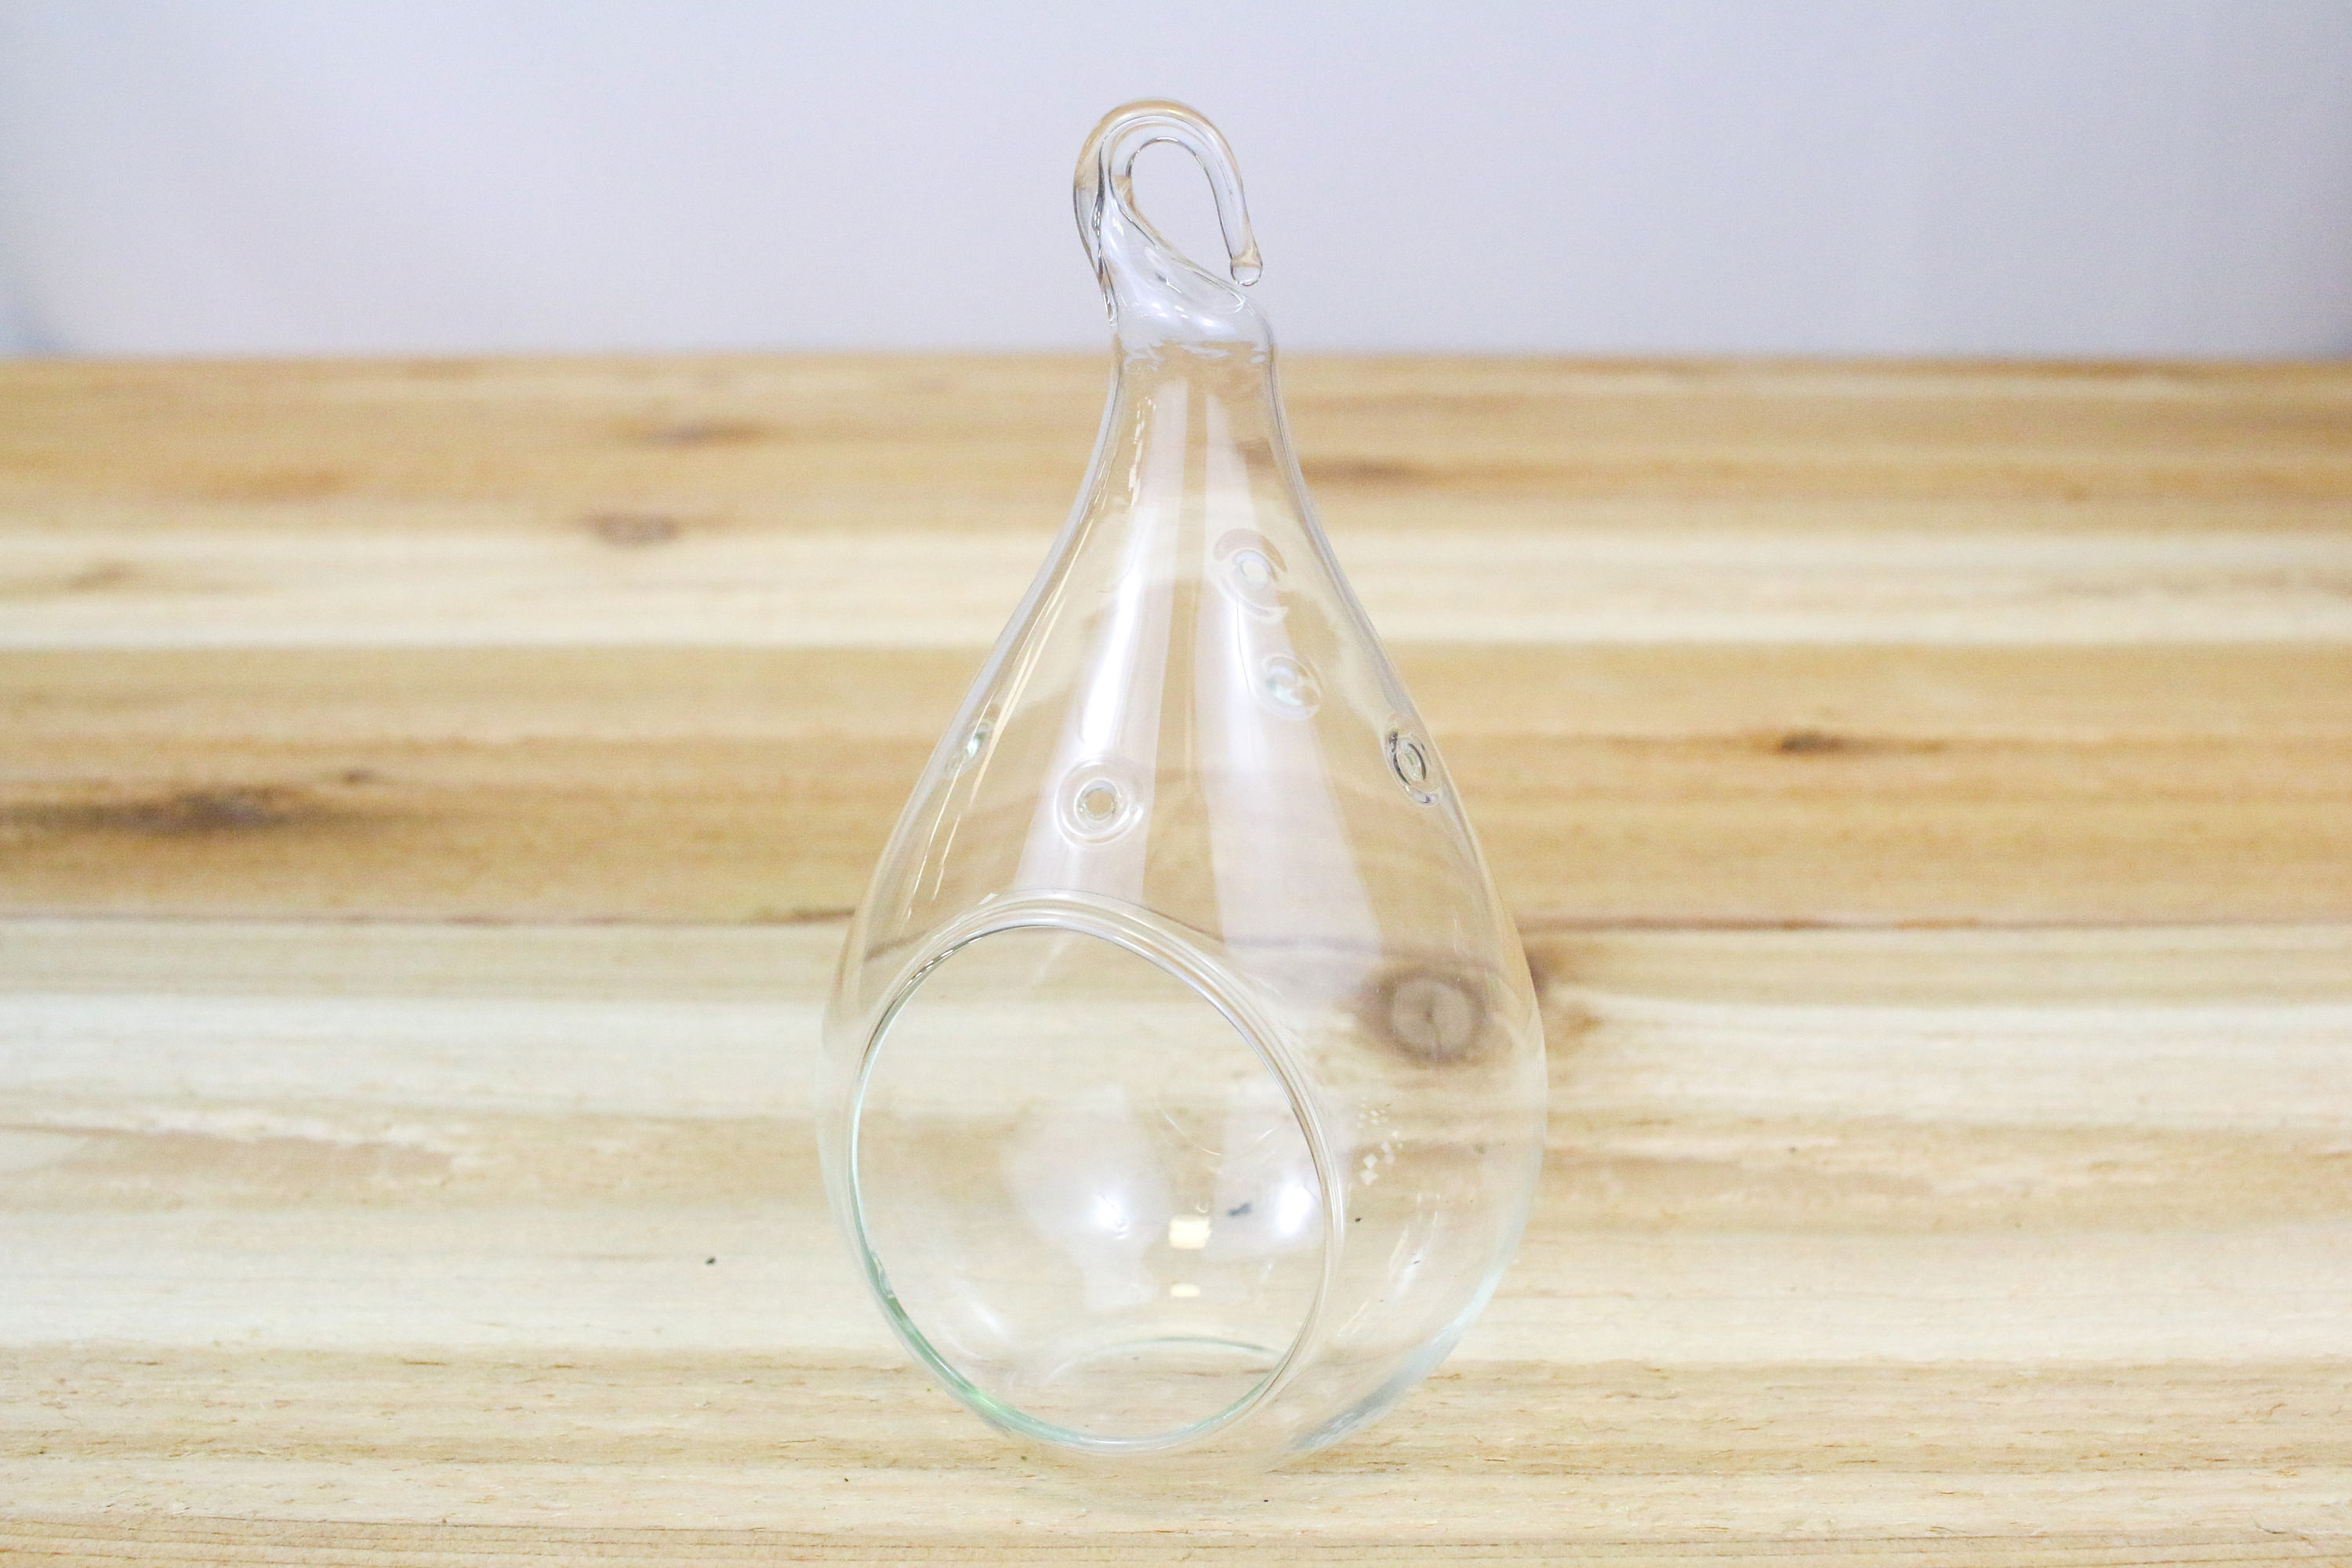 23 Famous Large Teardrop Glass Vase 2024 free download large teardrop glass vase of 1 hand blown glass teardrop terrarium hanging air plant etsy pertaining to image 0